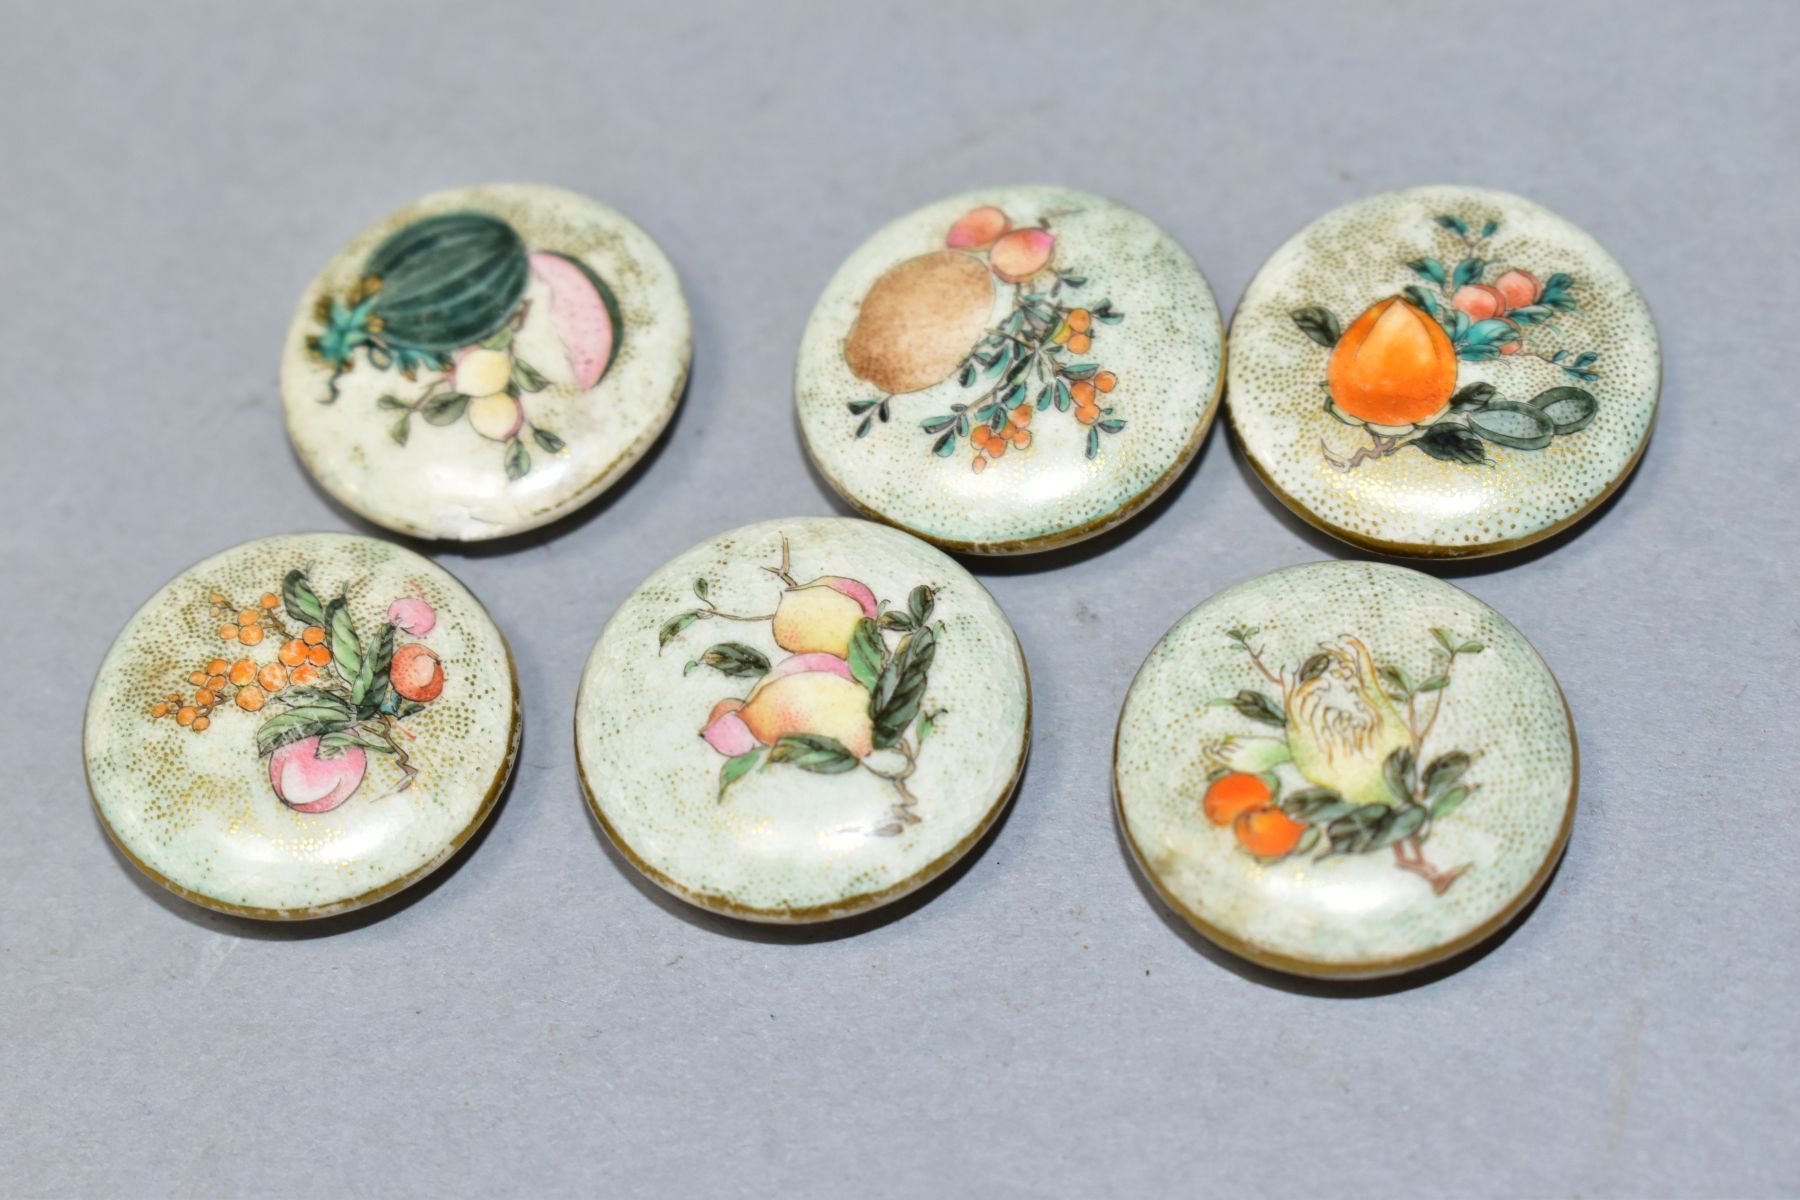 A SET OF SIX LATE 19TH/EARLY 20TH CENTURY JAPANESE SATSUMA POTTERY BUTTONS, painted with fruits - Image 3 of 4